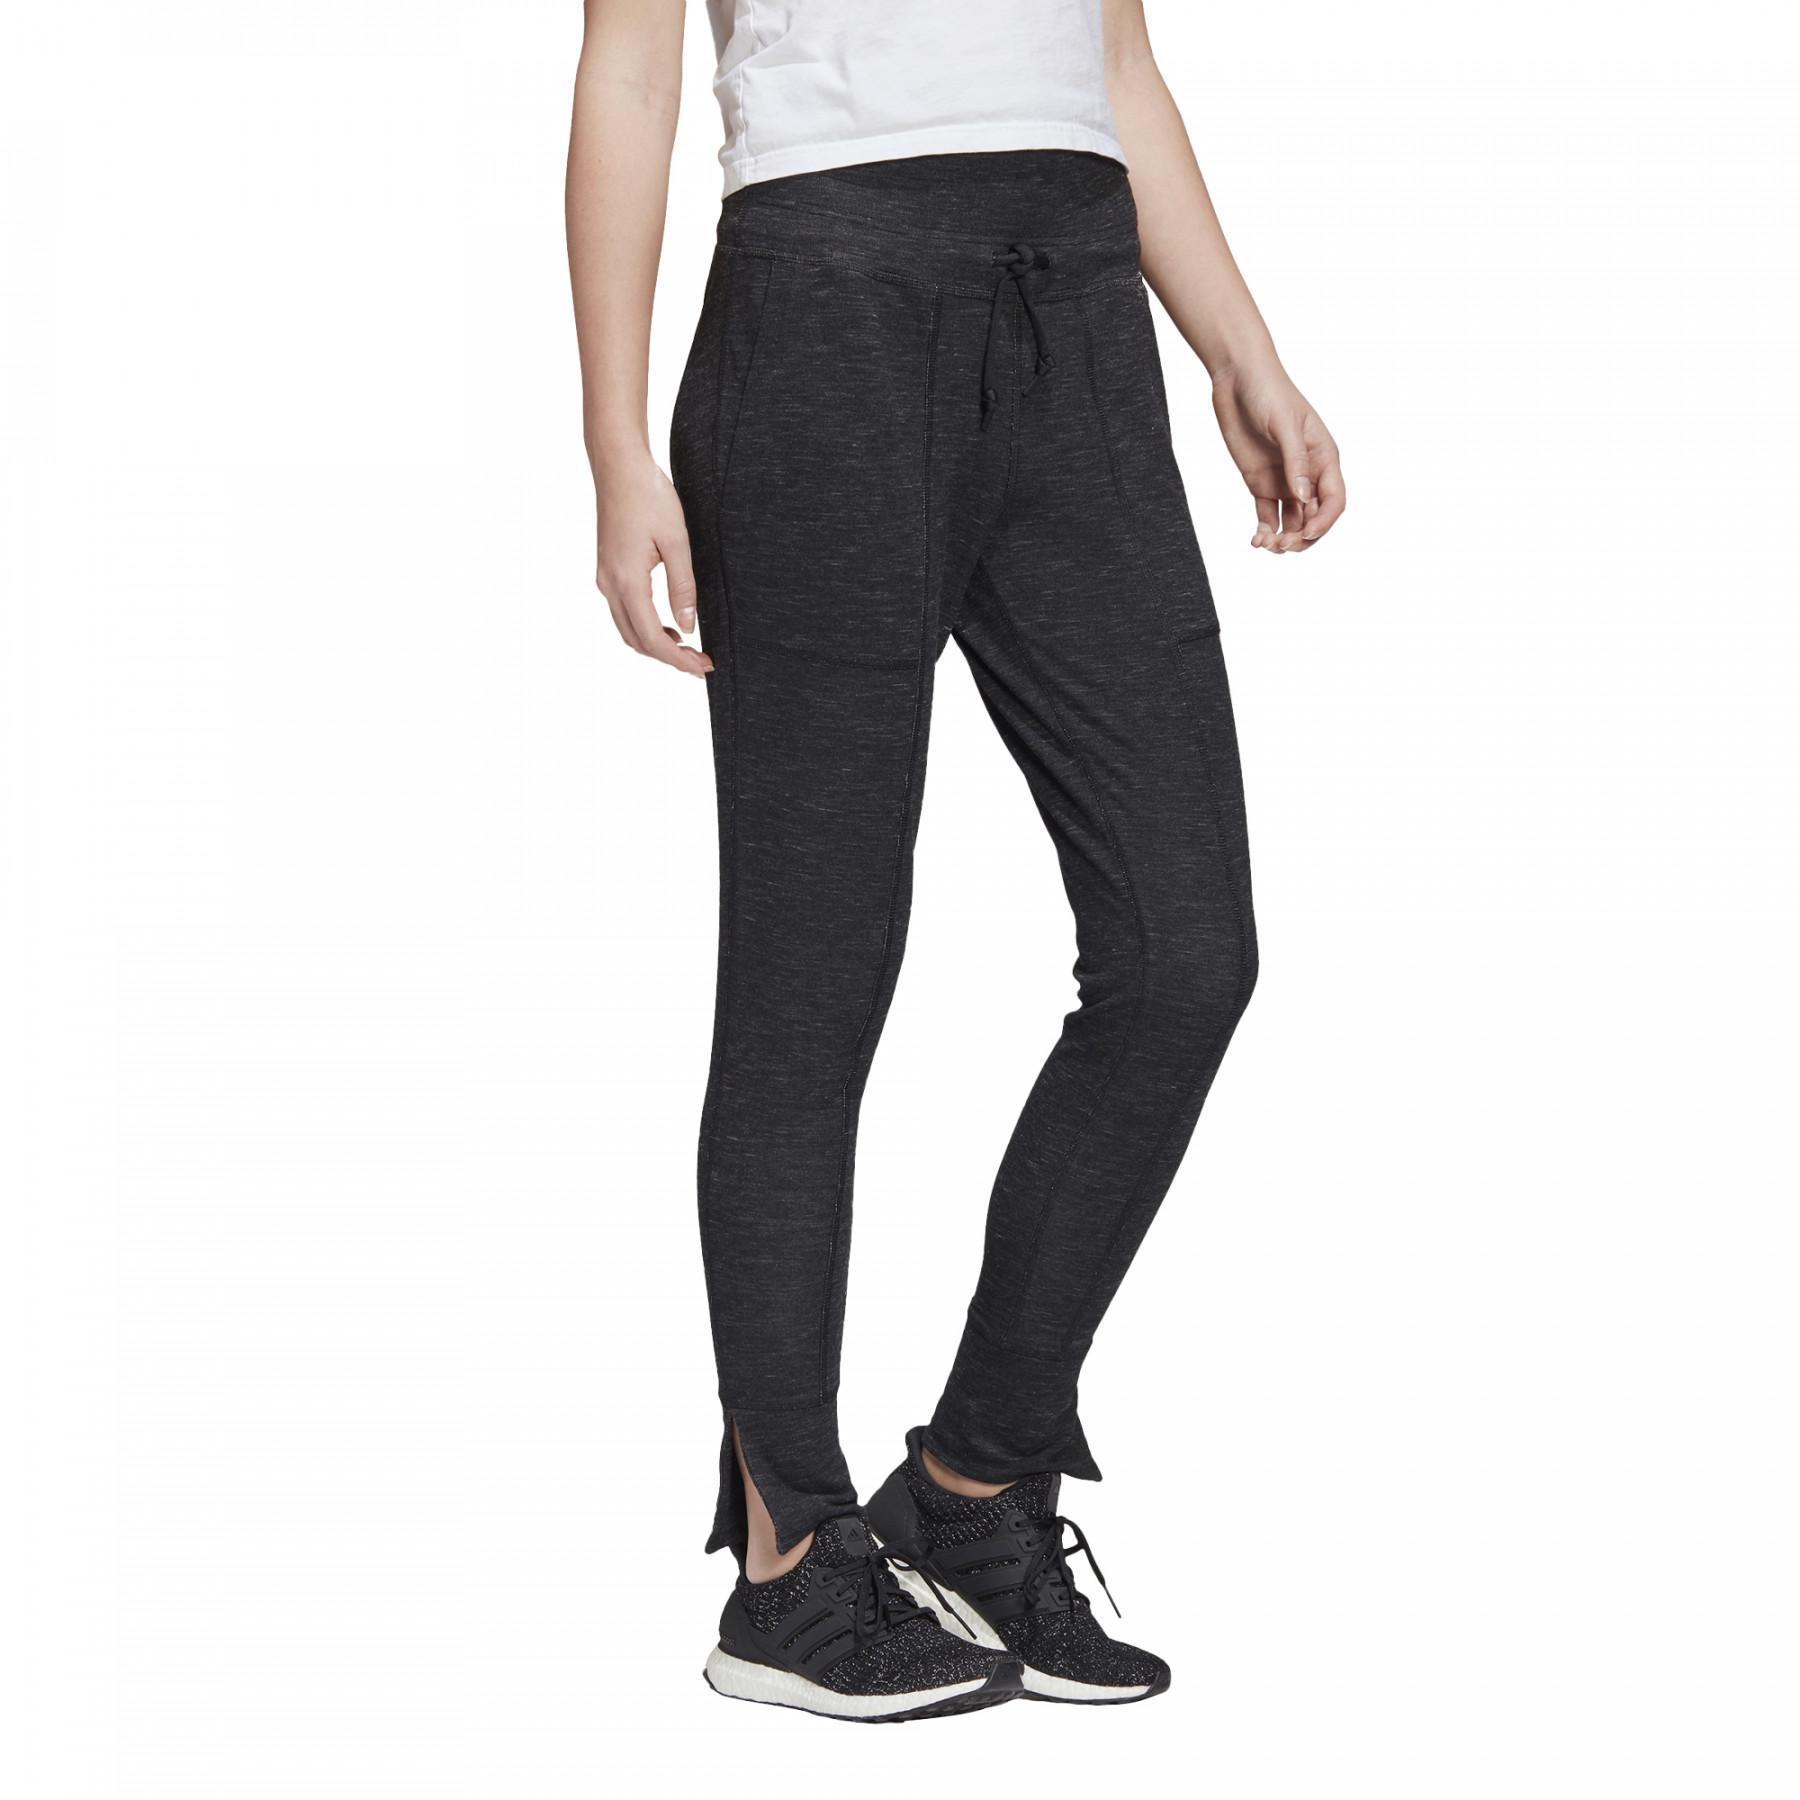 Women's jogging suit adidas High-Waisted Slim